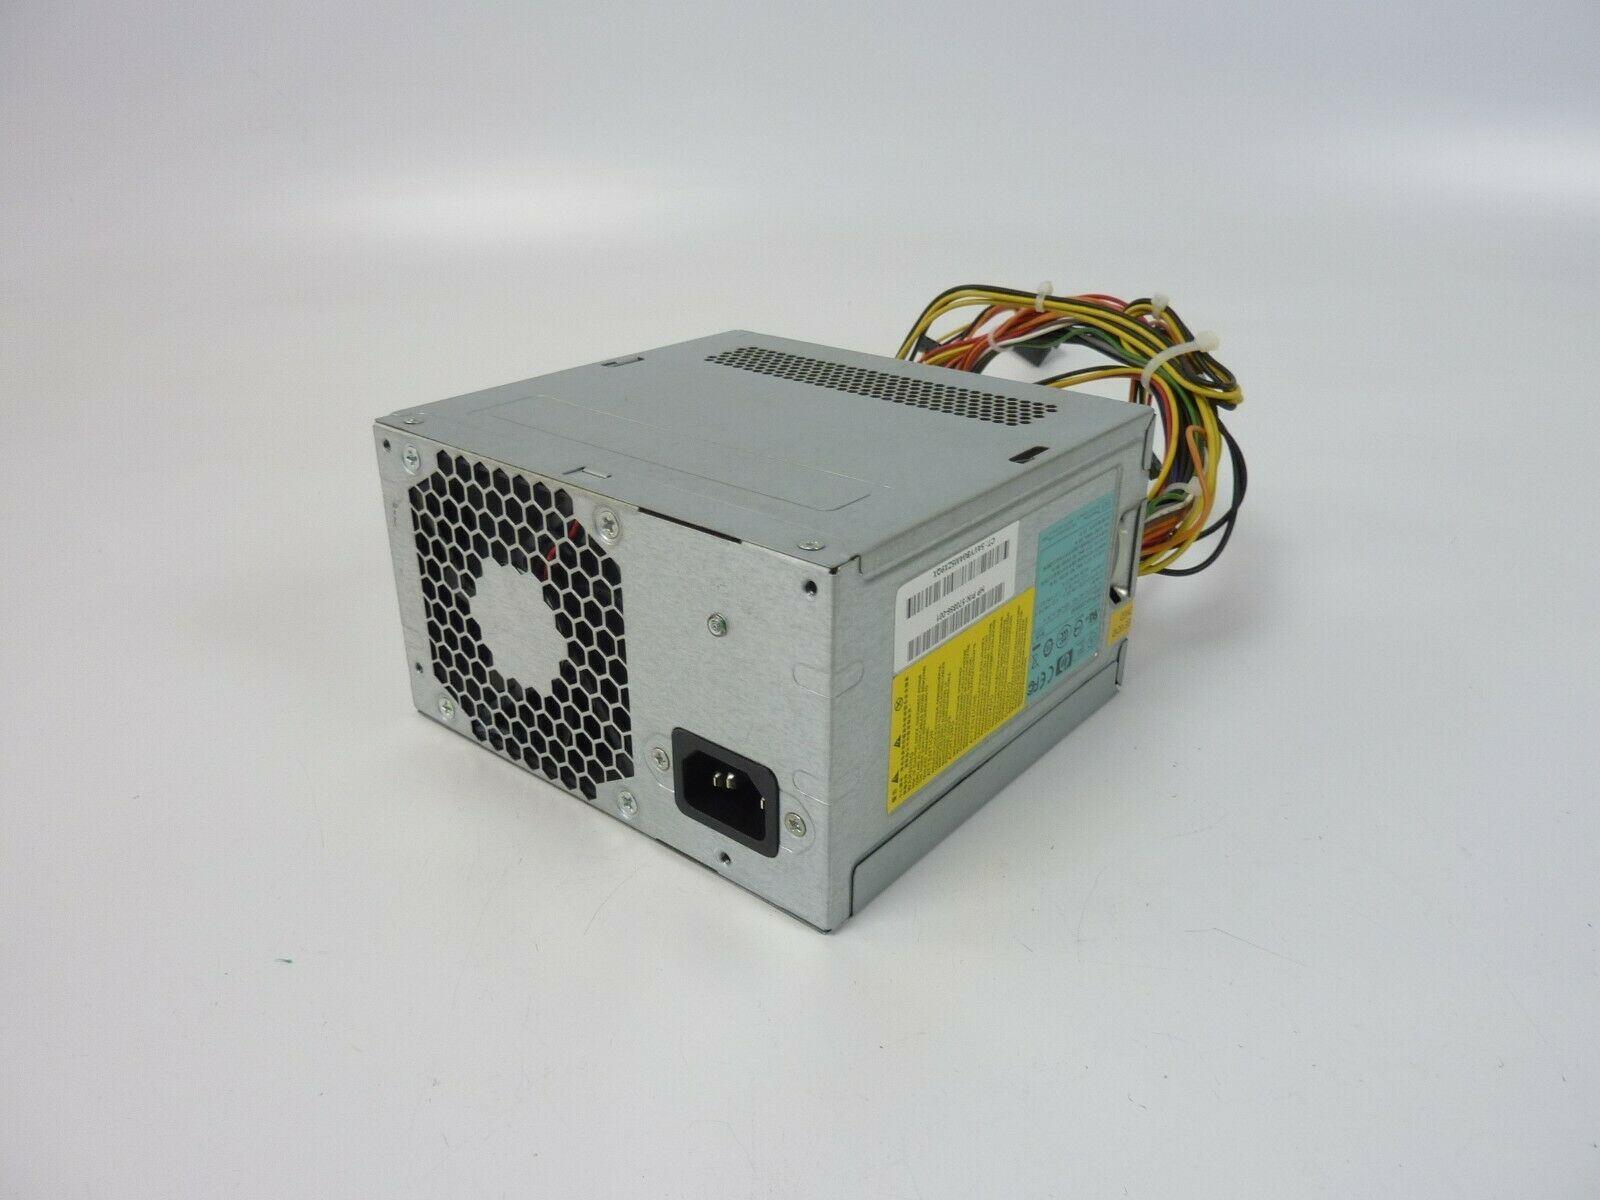 HP D3006A0 PS 5301 8 570856 001 power supply 300w active pfc no longer supplied